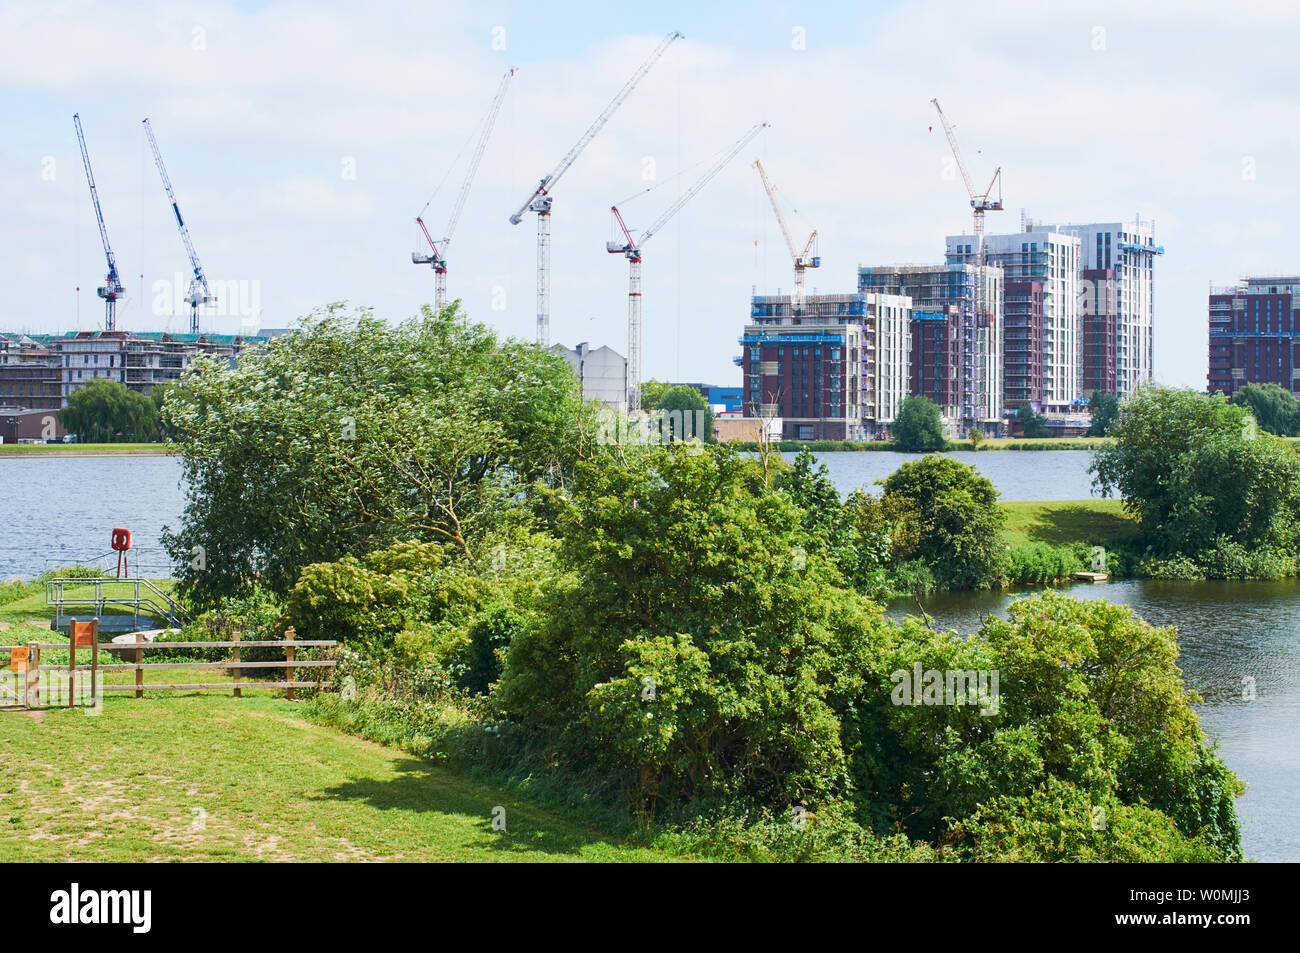 Walthamstow Wetlands, North London UK, in summertime, with new apartments under construction in the background Stock Photo